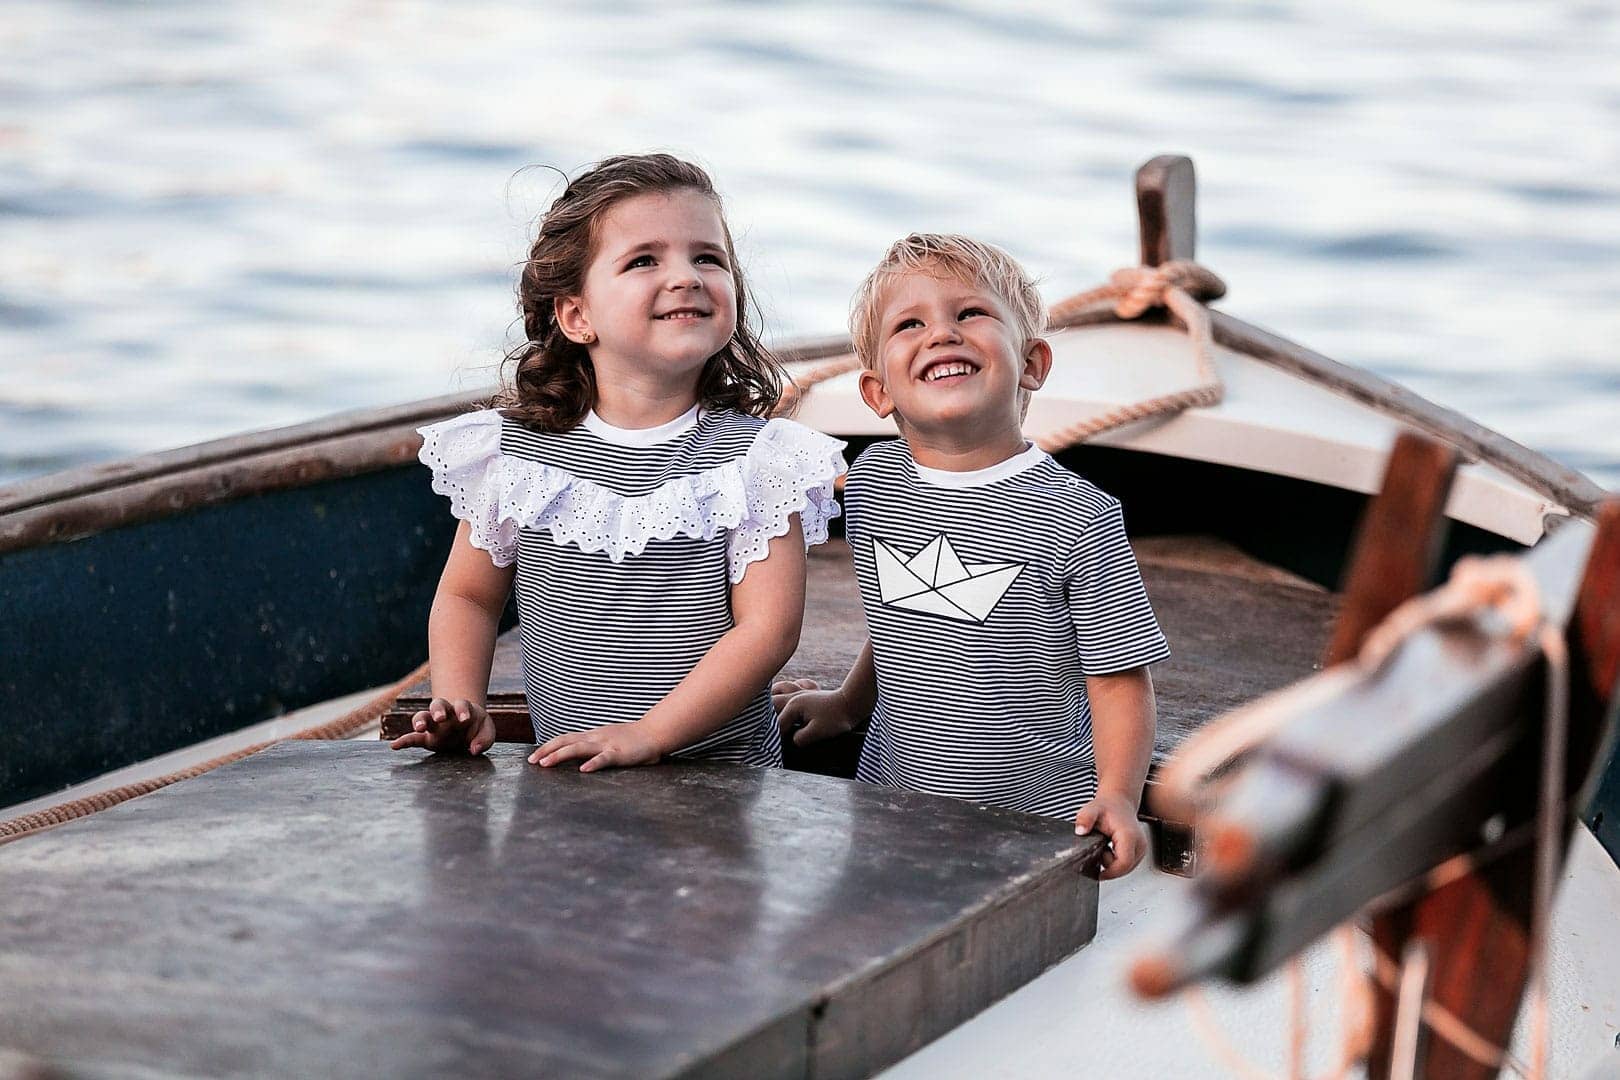 photograph of two smiling children playing on a boat dressed in a blue striped t-shirt on a jetty in Ibiza